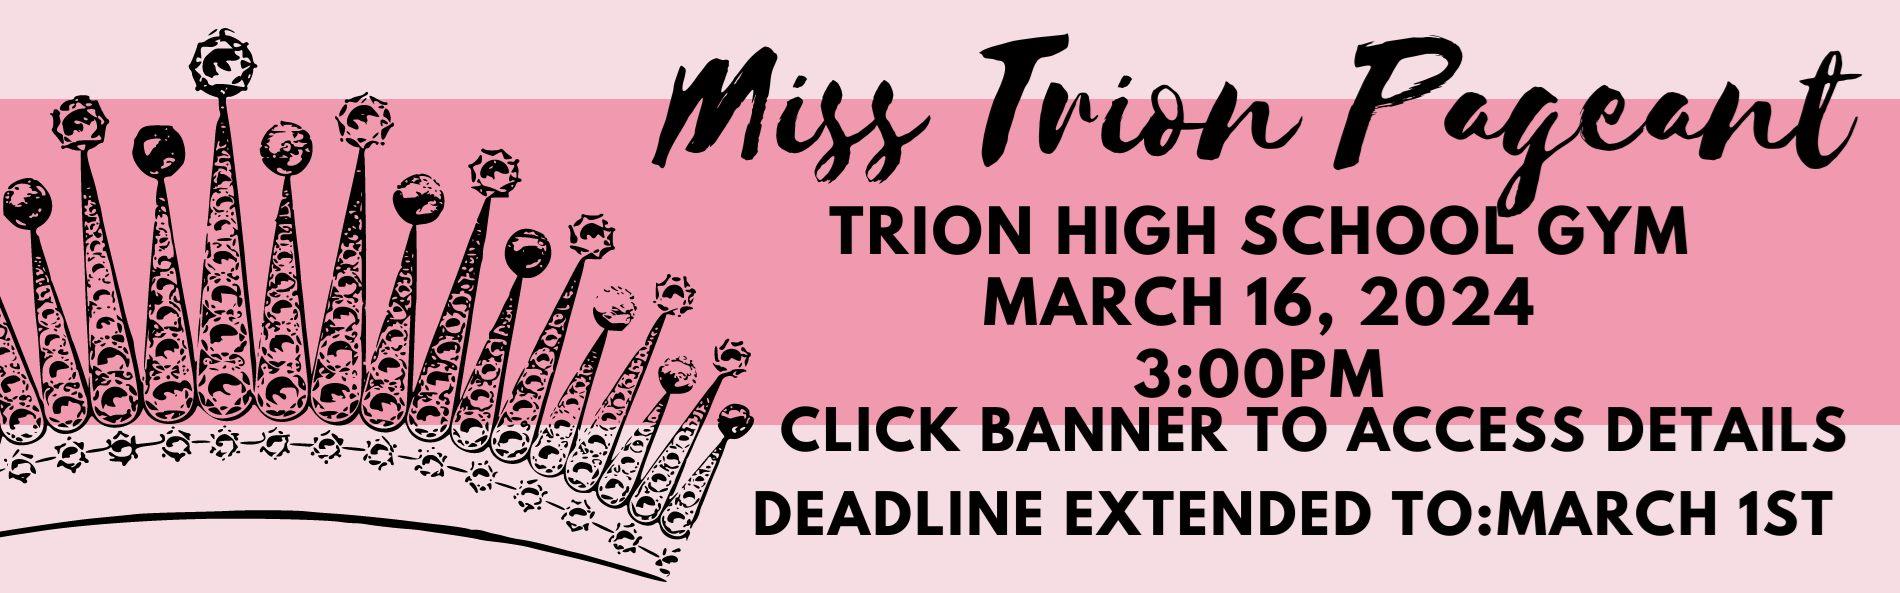 2024 MISS TRION PAGEANT